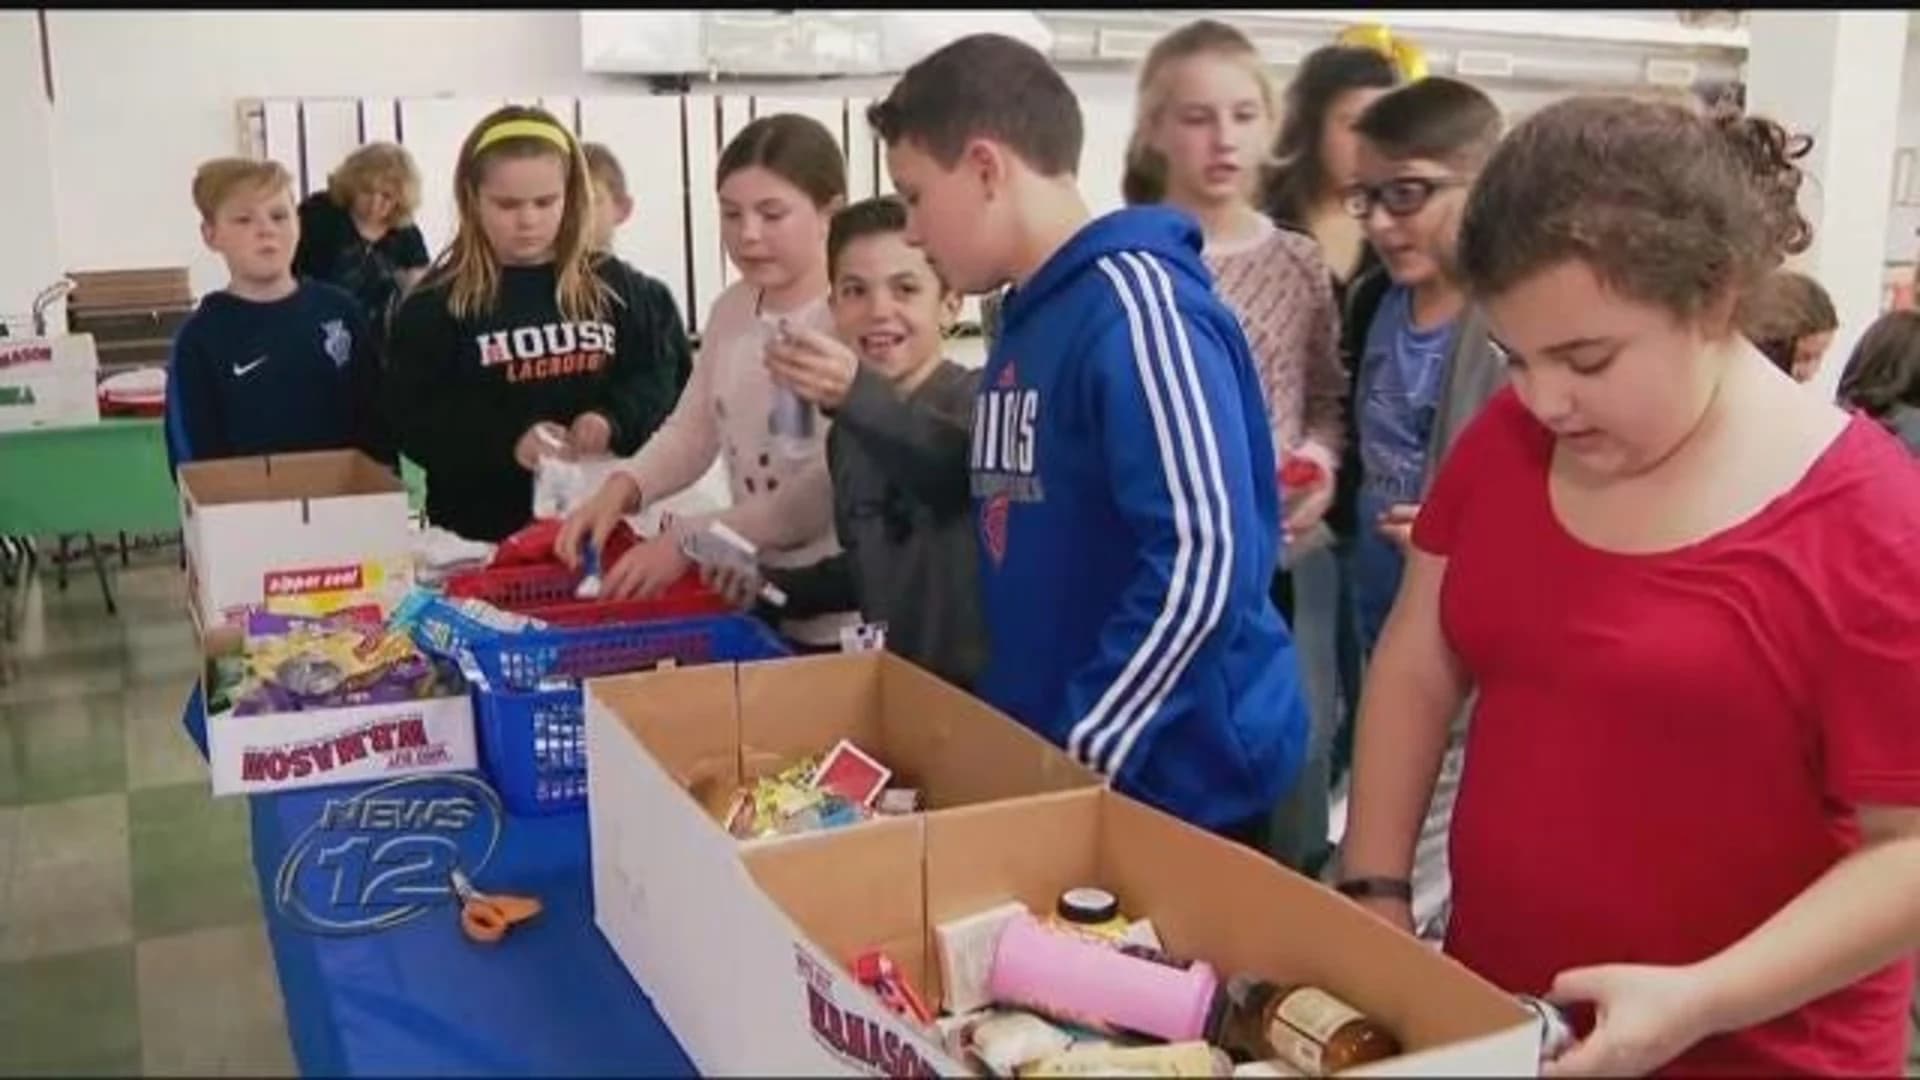 Students prepare holiday gifts for US troops in Afghanistan